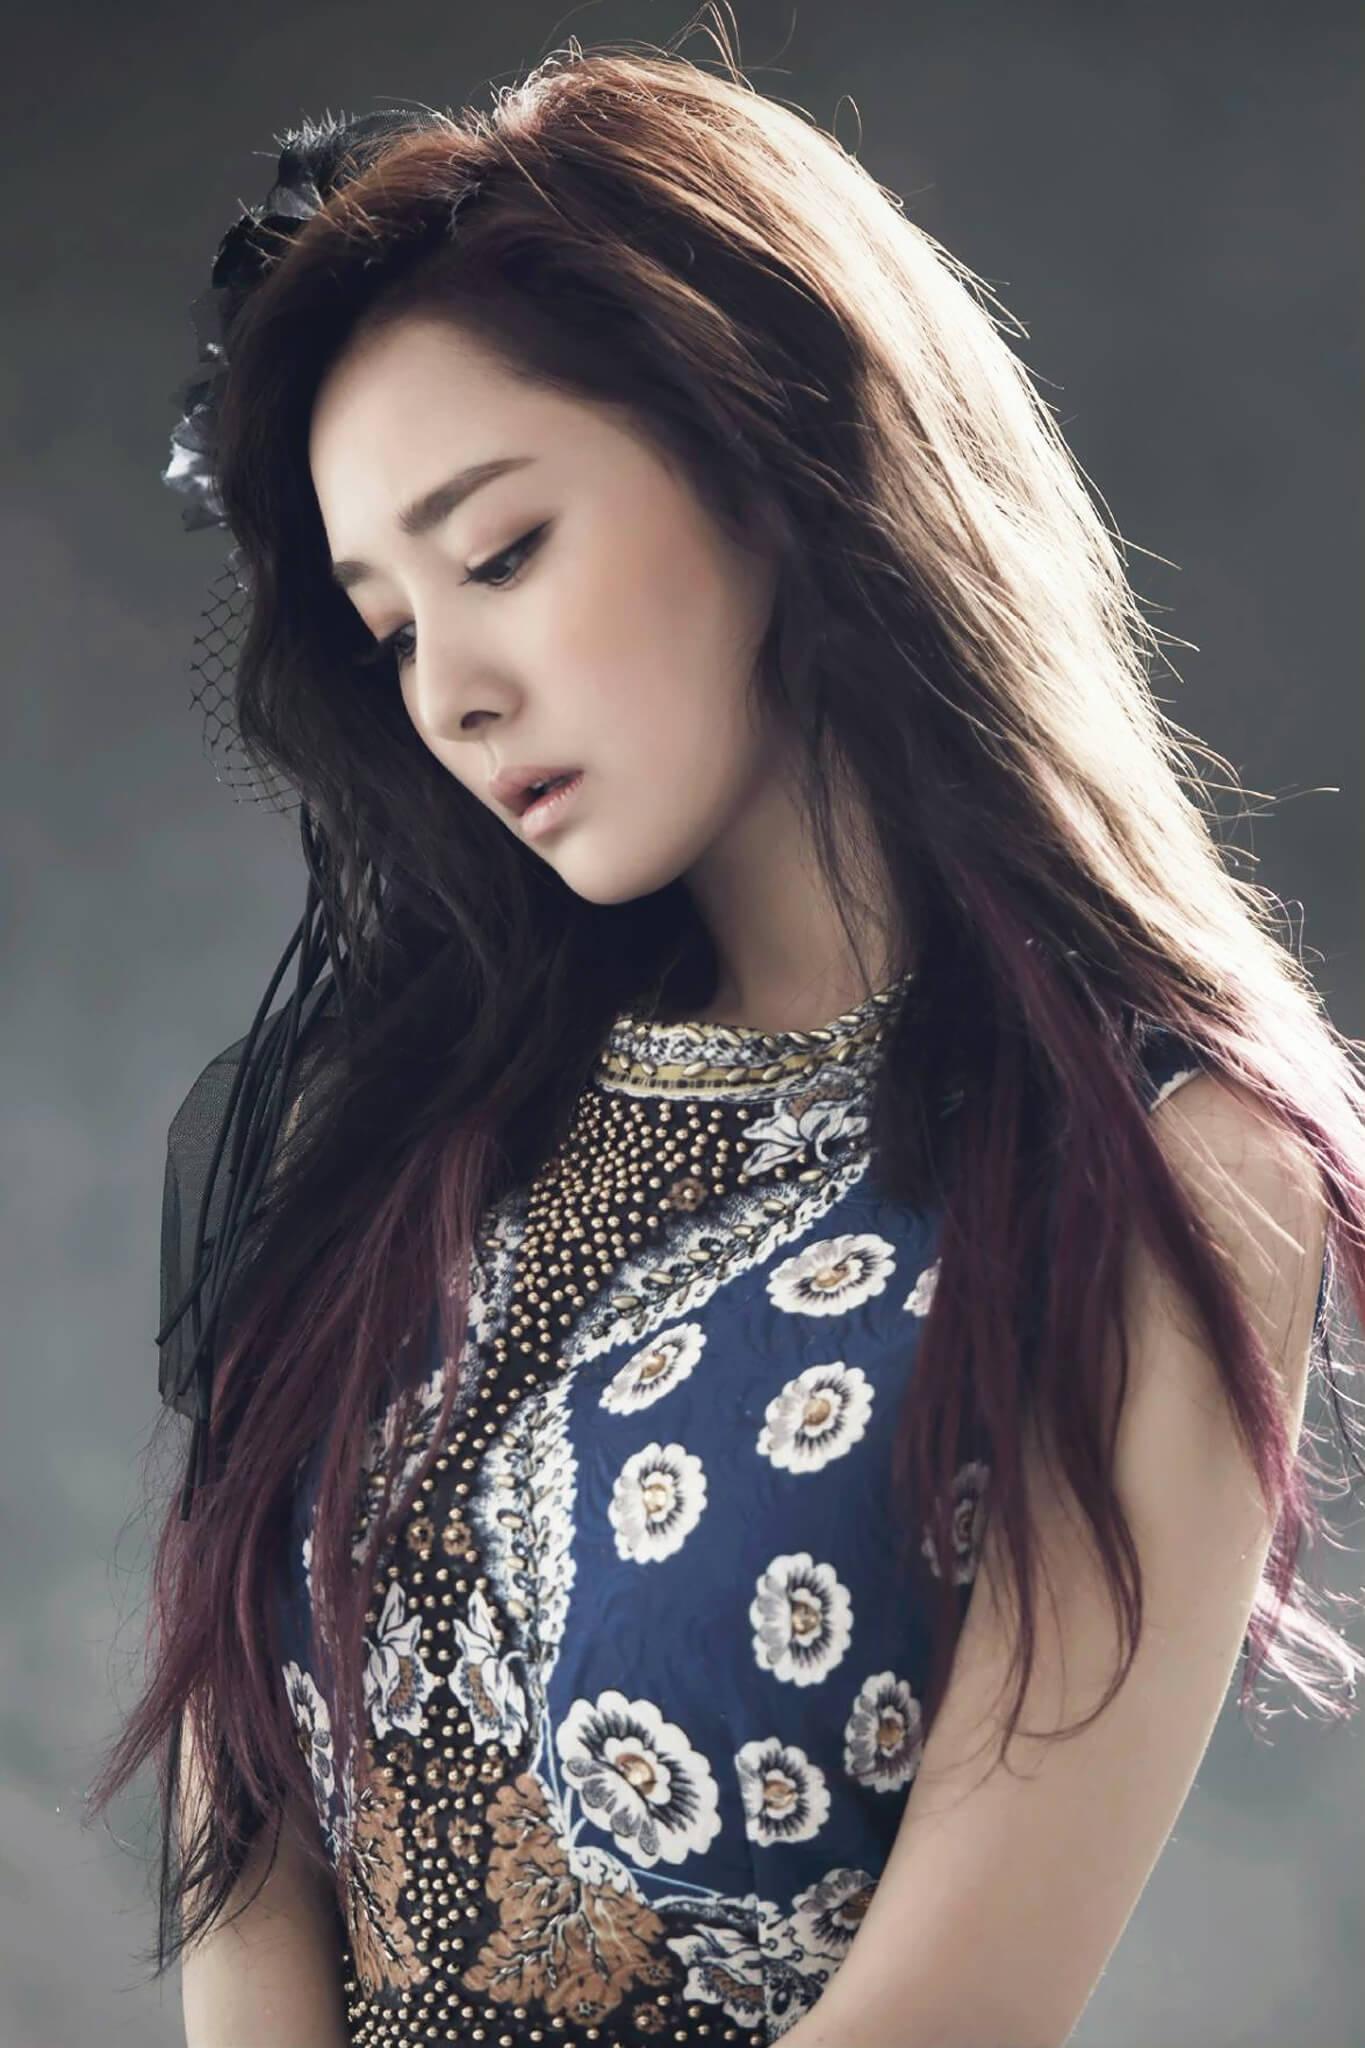 49 Hot Pictures Of Jiyul – Dal Shabet Which Will Make You Drool For Her | Best Of Comic Books